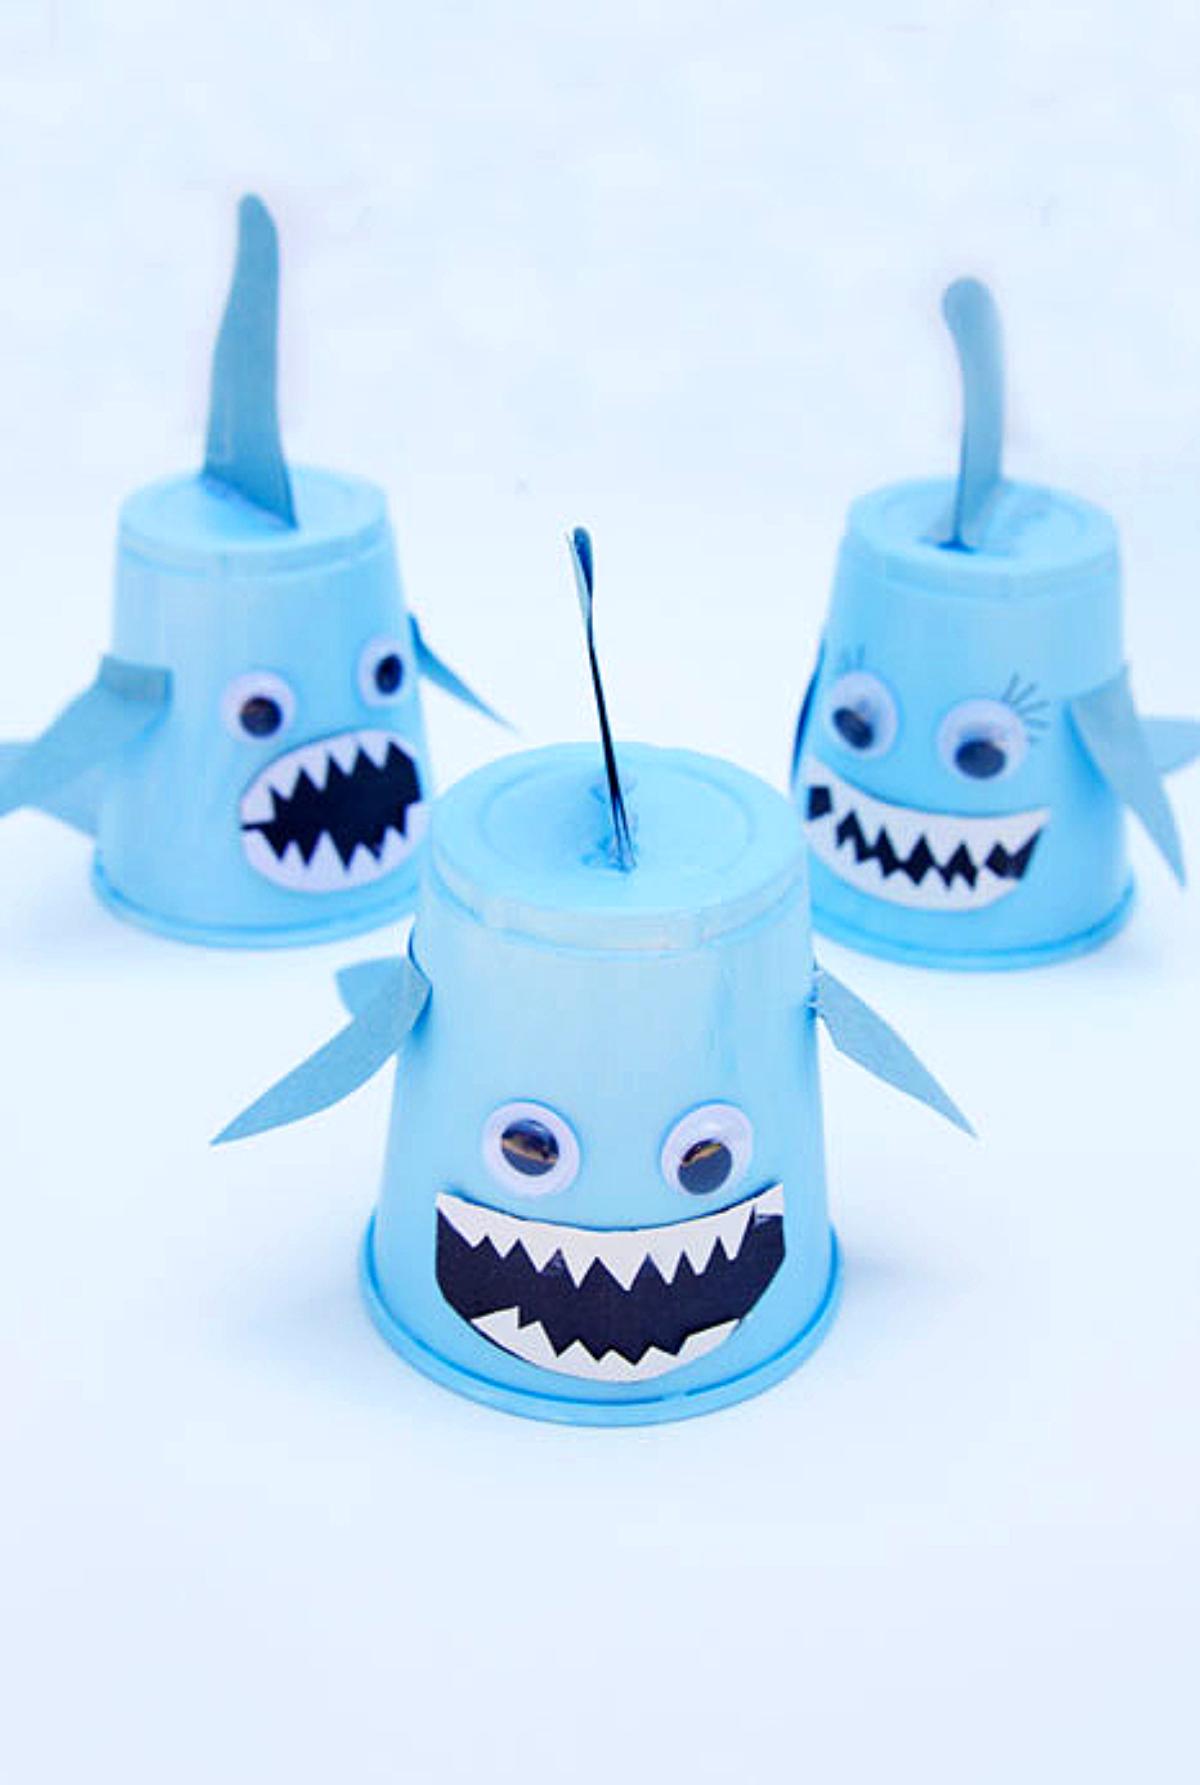 Baby Shark Craft Using Paper Cups